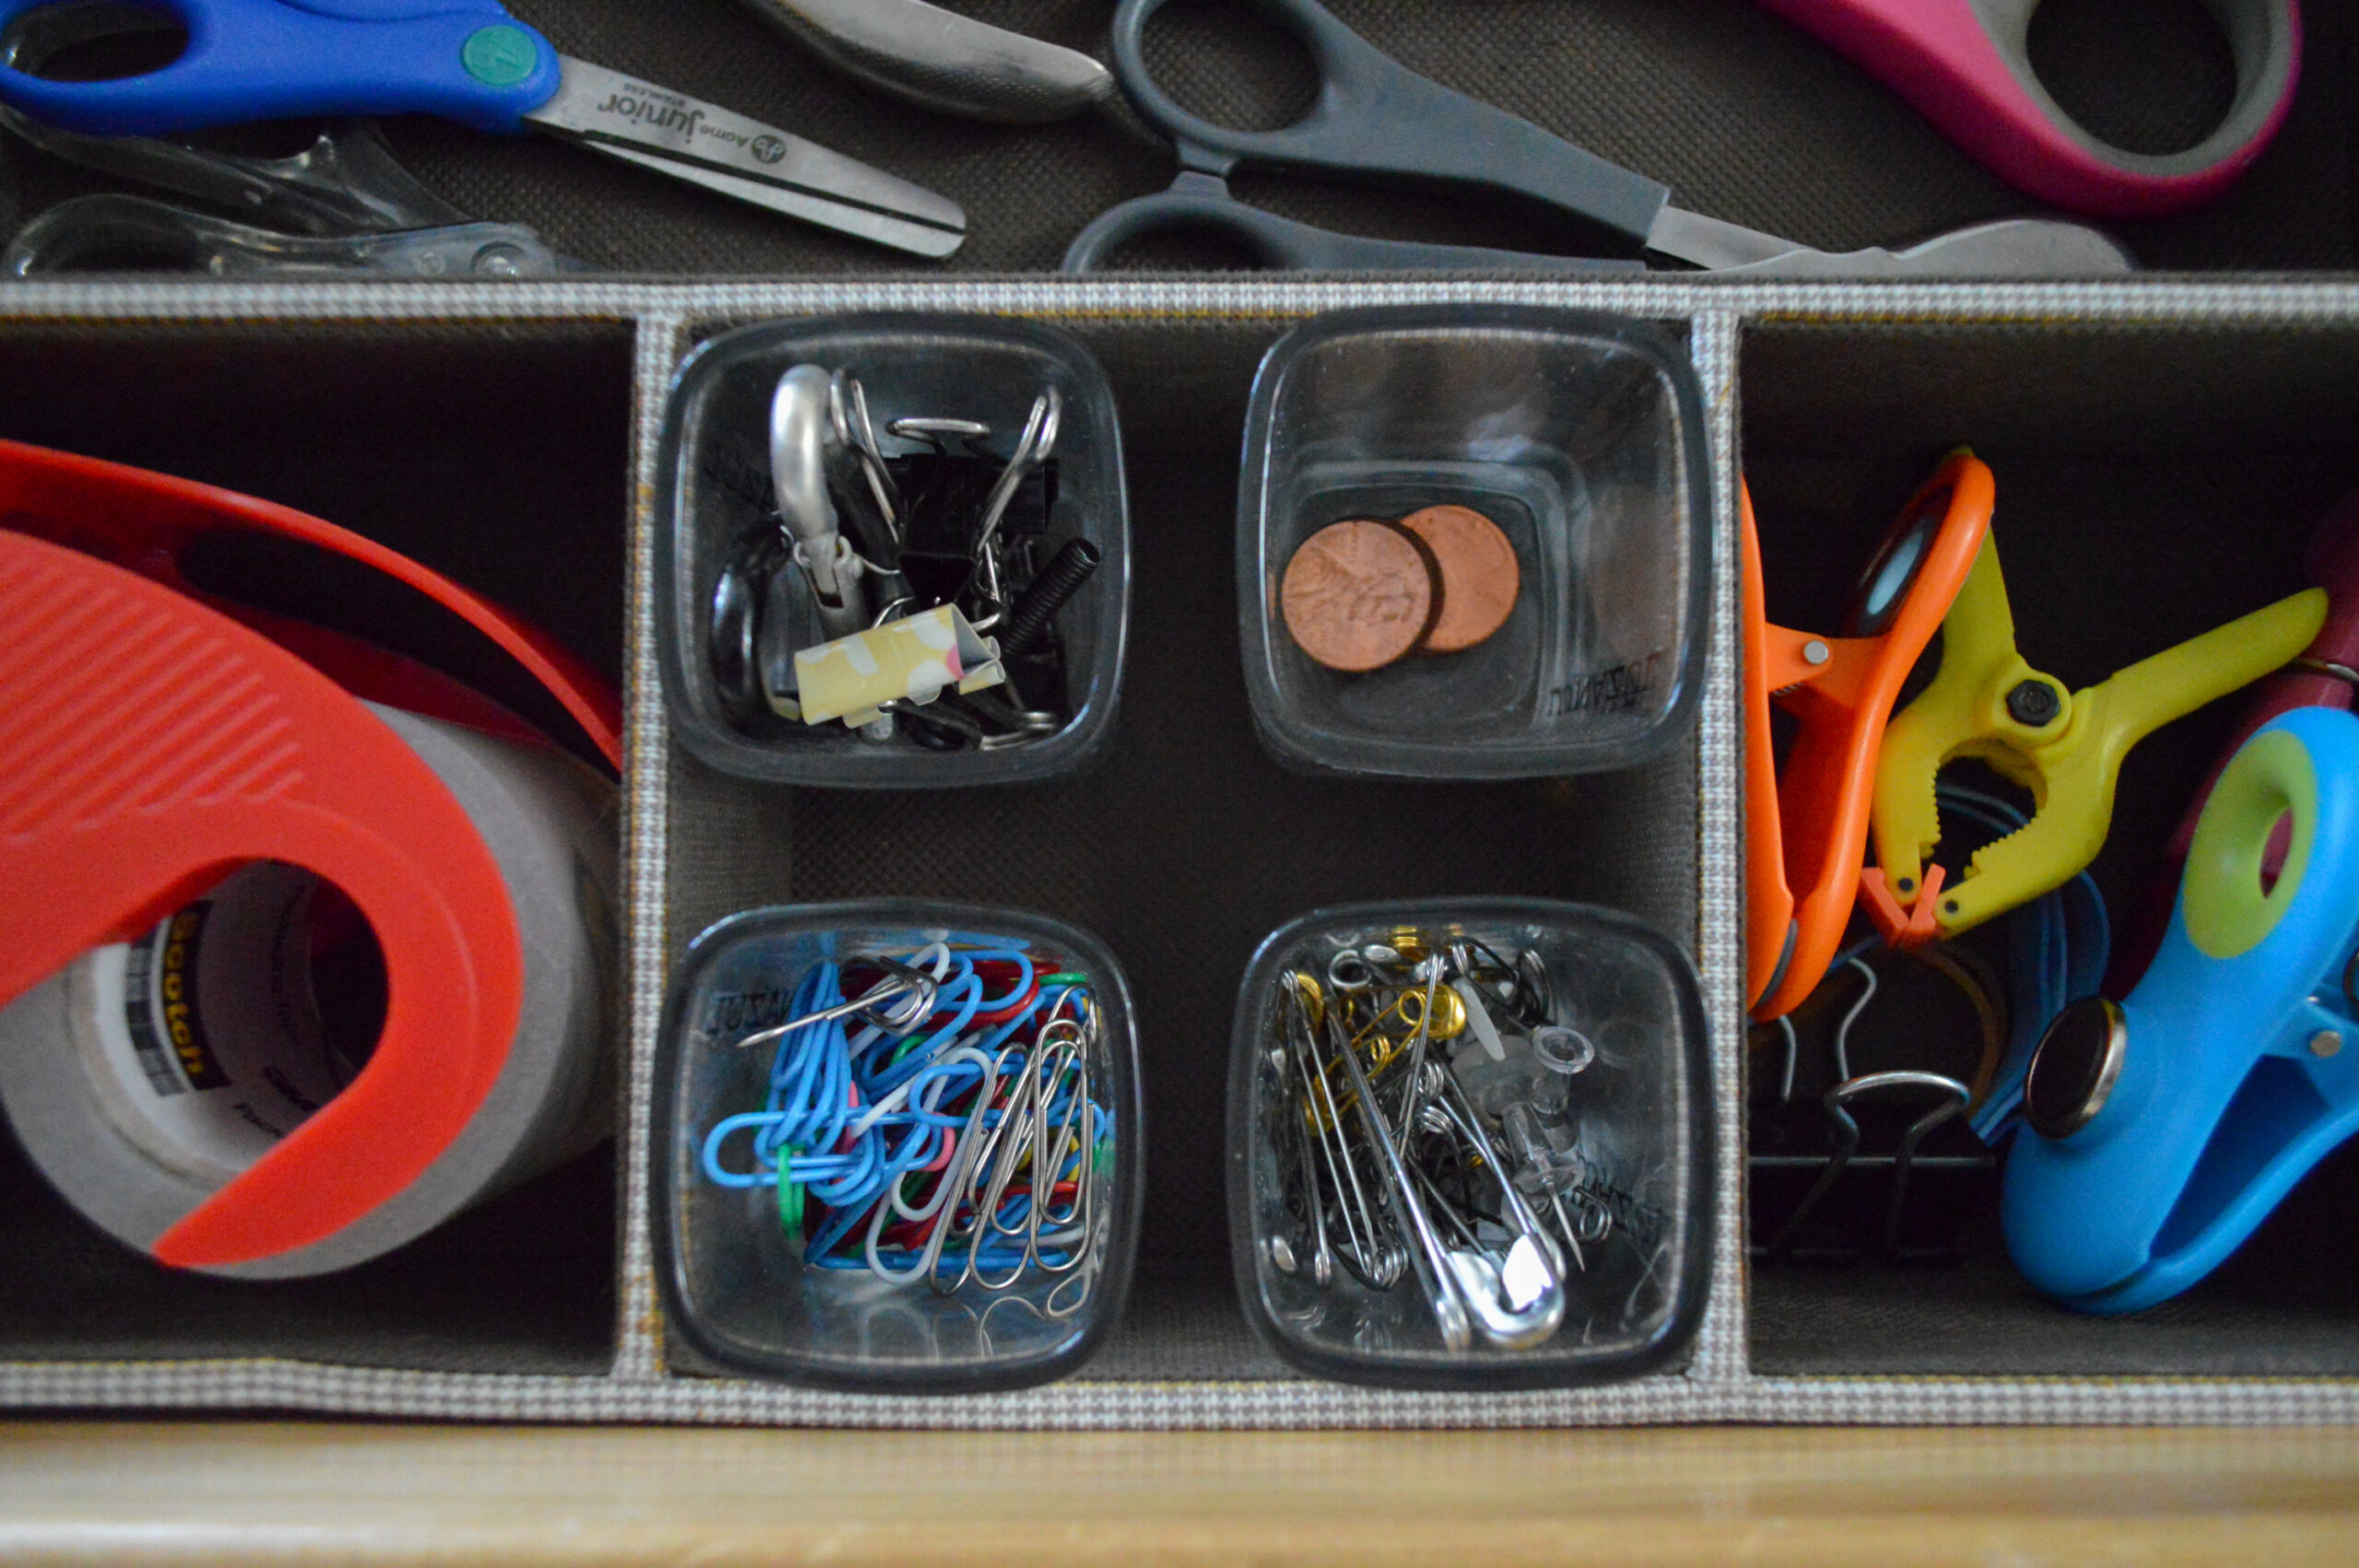 How To Organize A Junk Drawer And Miscellaneous Items - Fox Hollow